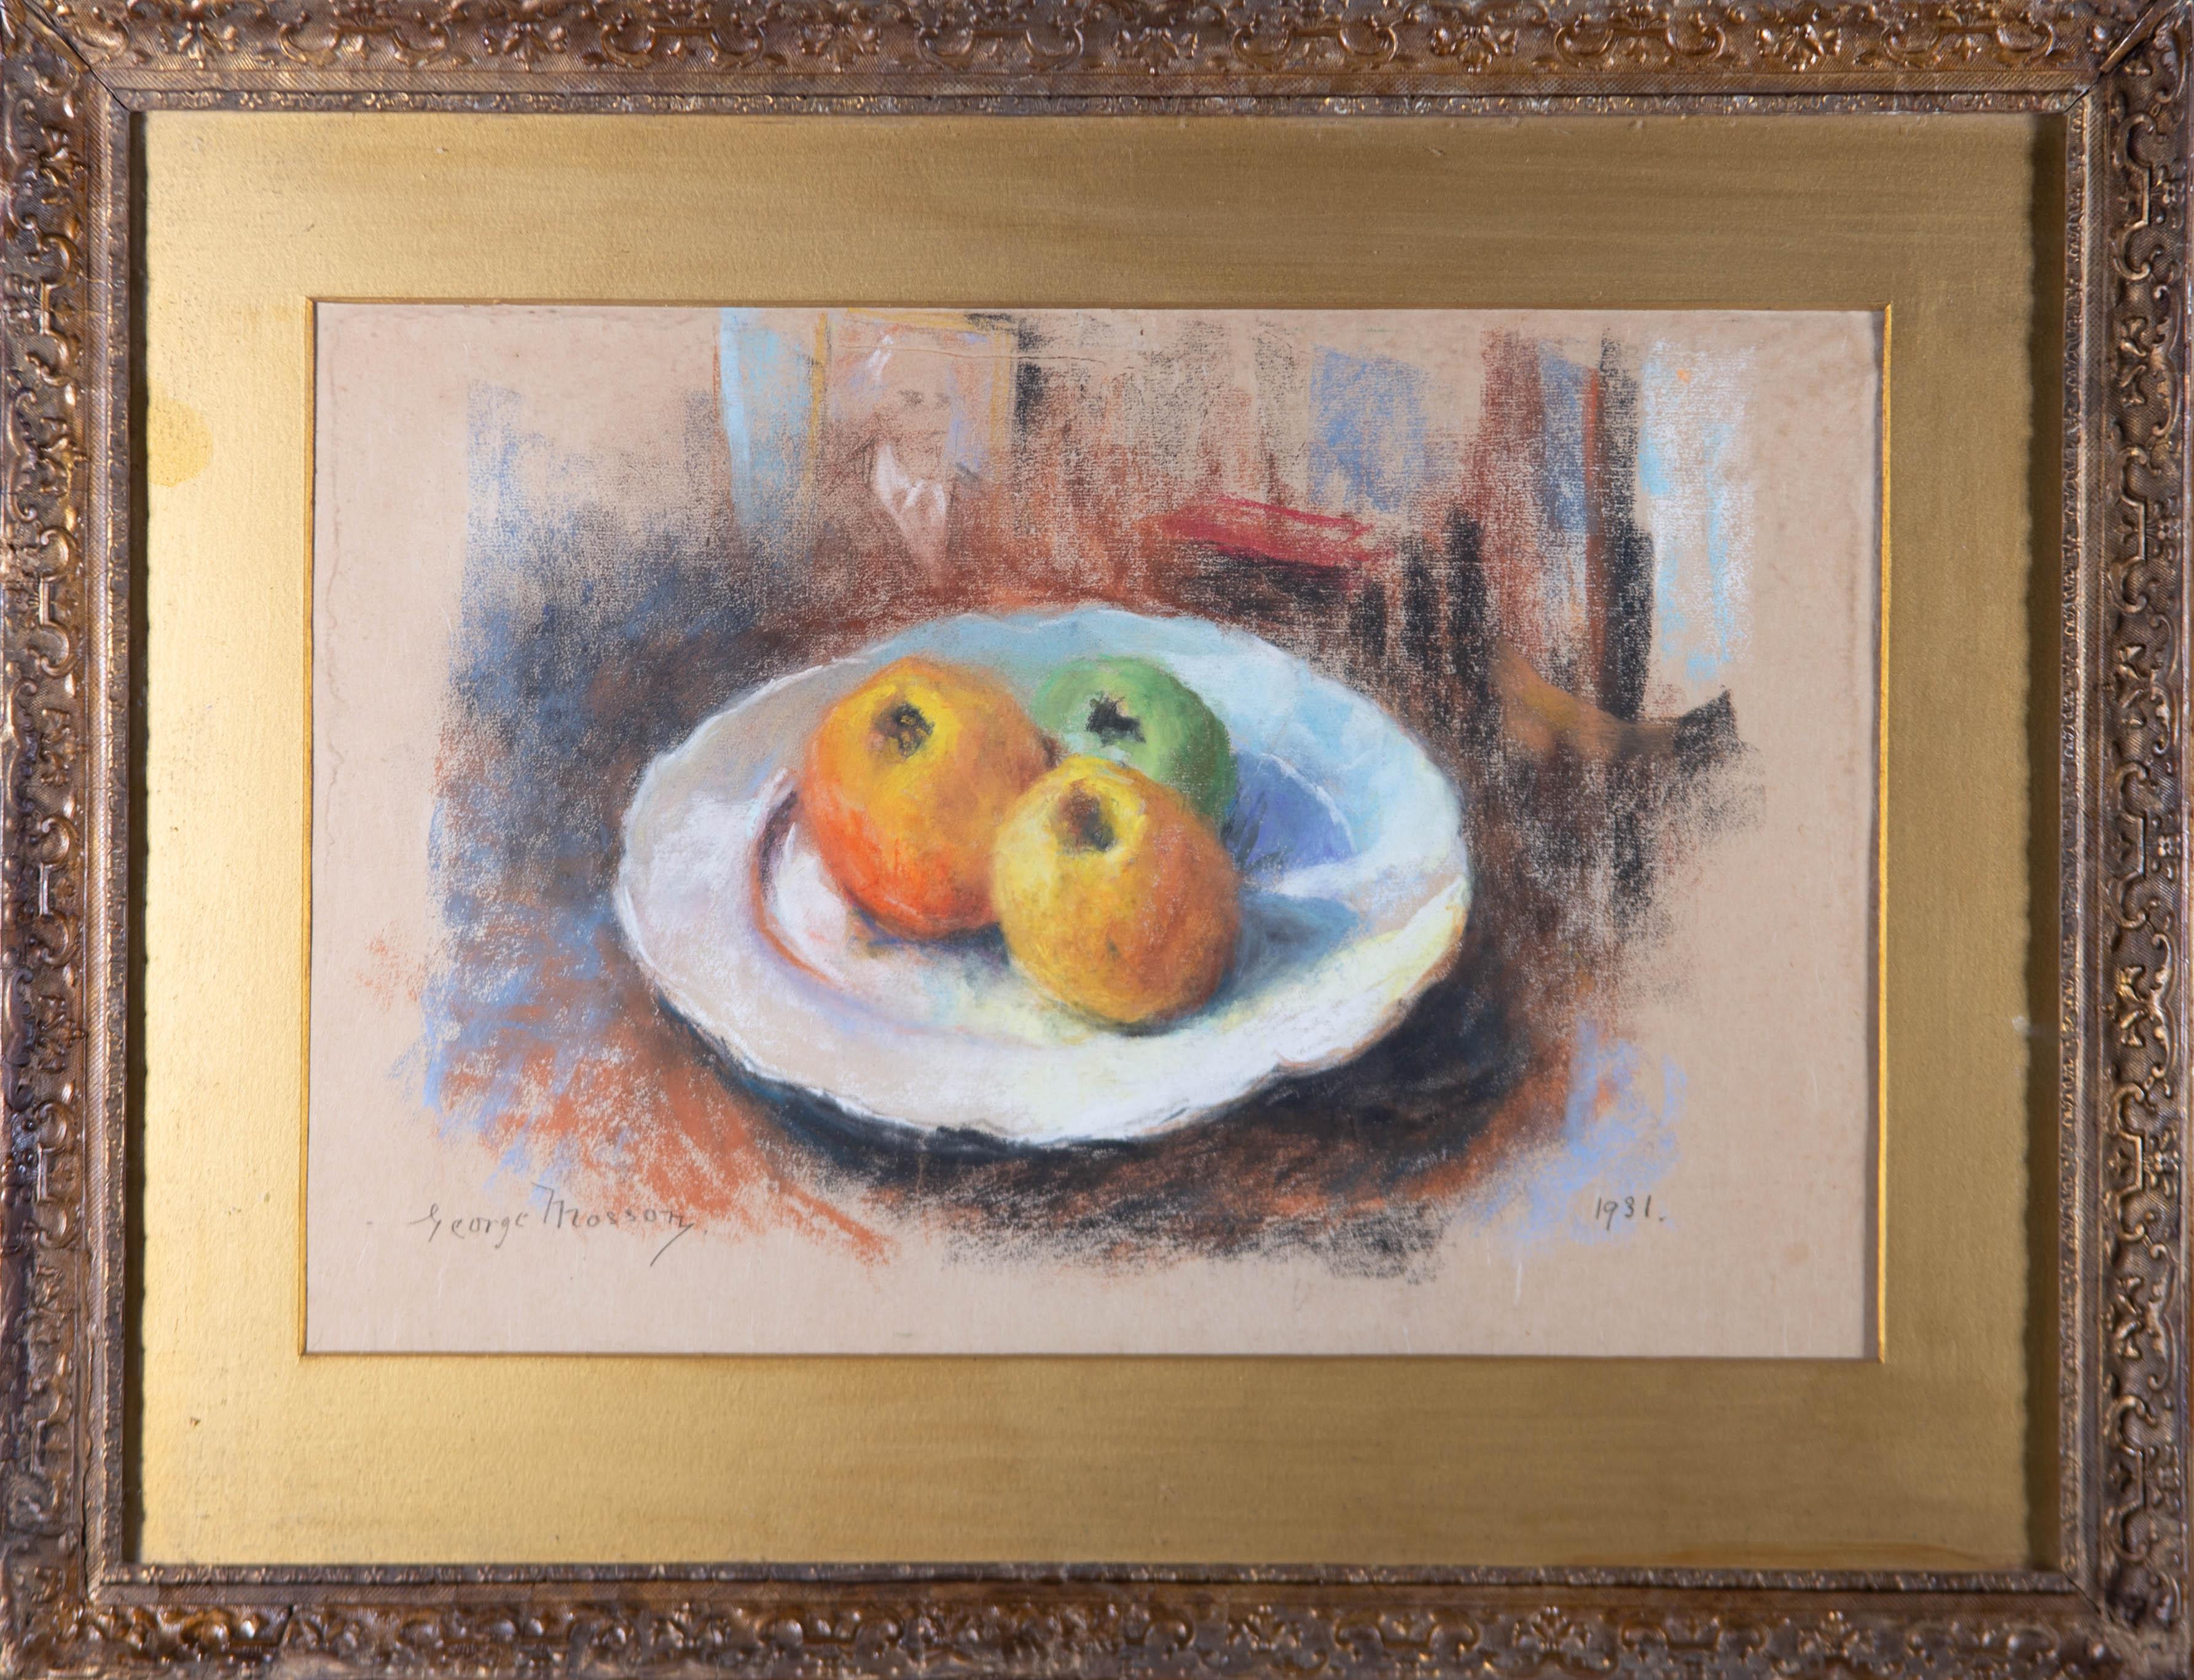 A fine pastel drawing by the Franco-German artist George Mosson, depicting three vibrant apples on a white plate. This striking sketch-like drawing clearly illustrates the artist's proficiency in the subject and medium. Mosson's thoughtful use of